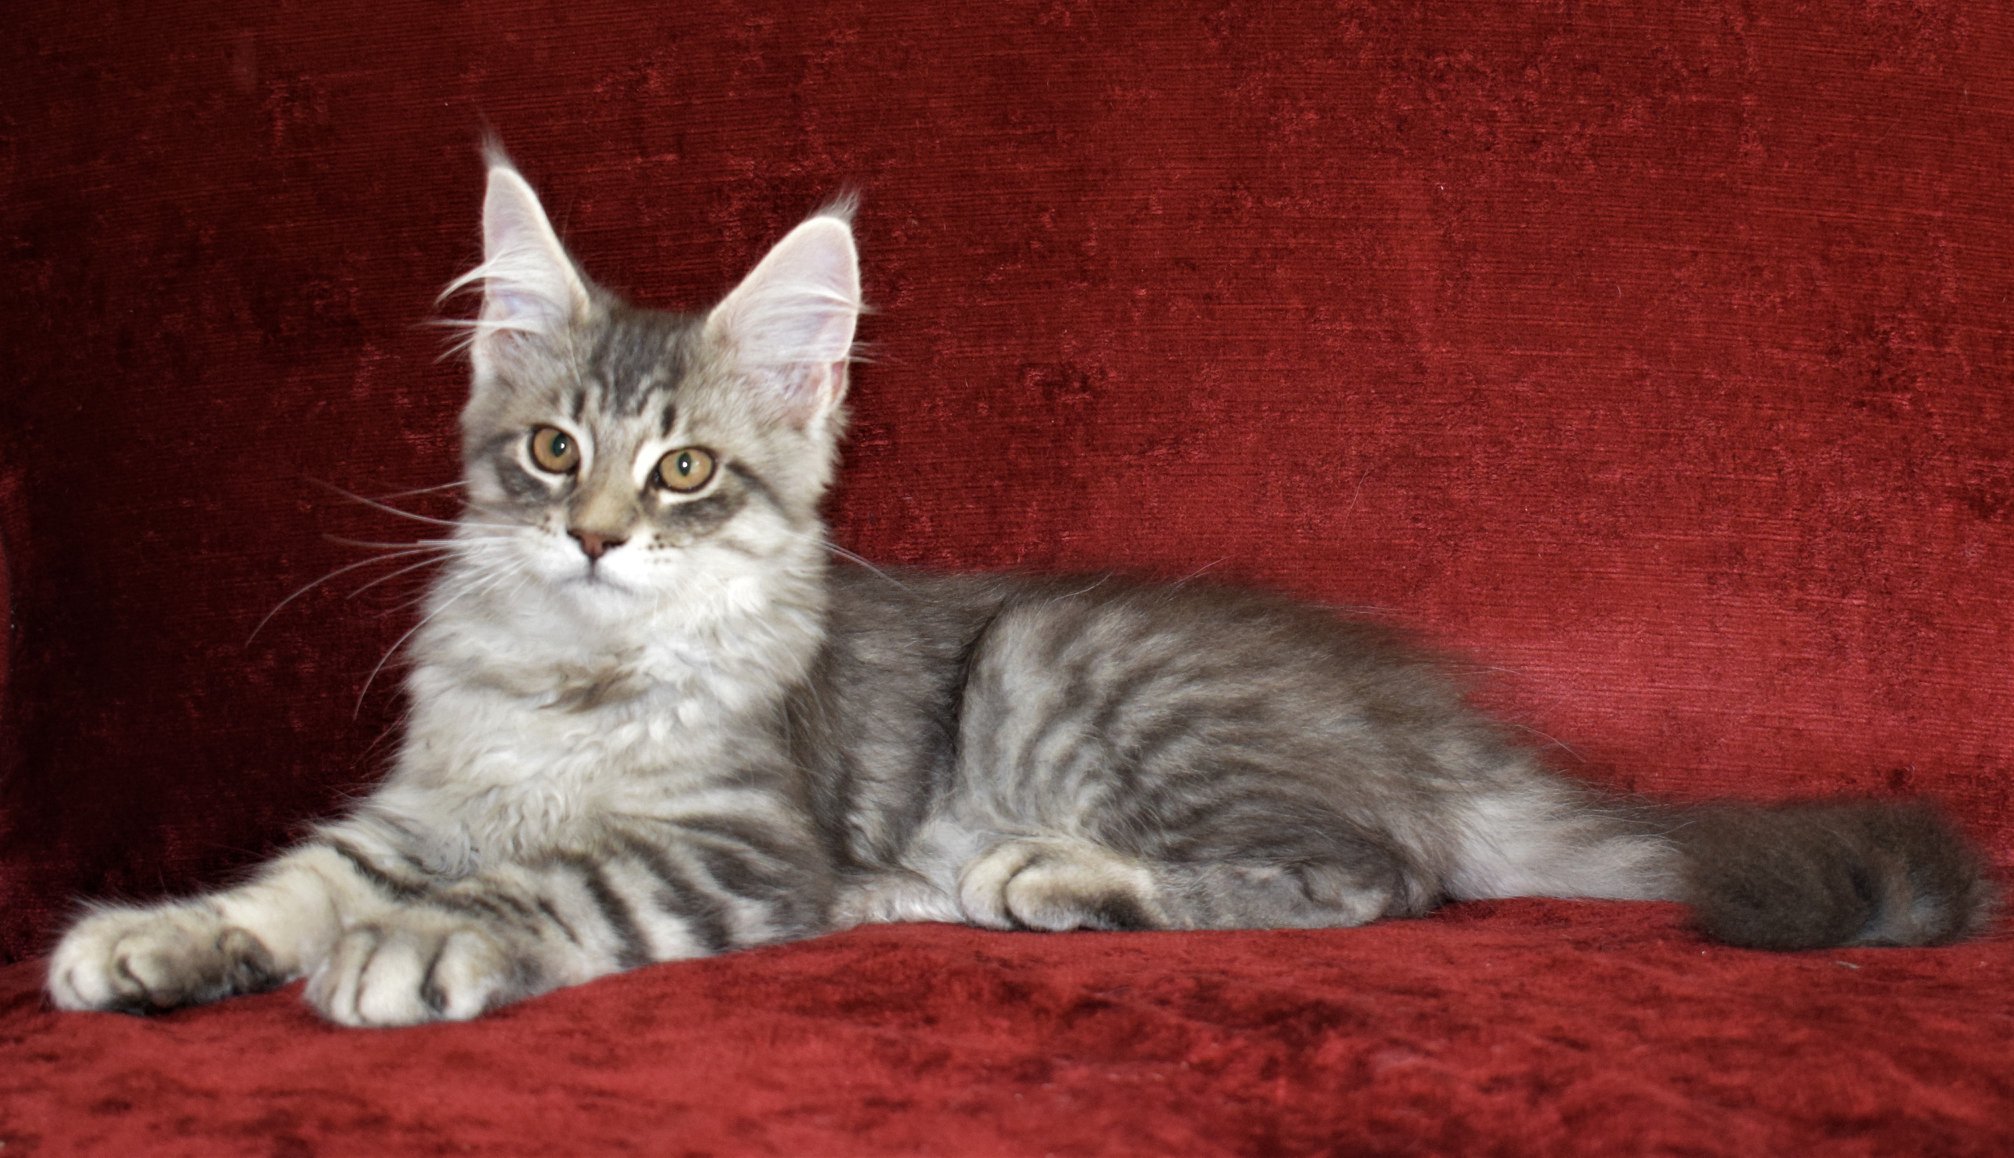 Samson is a large Silver and Black male macheral tabby that lives at Florida Maine Coons in Dunnellon, Florida